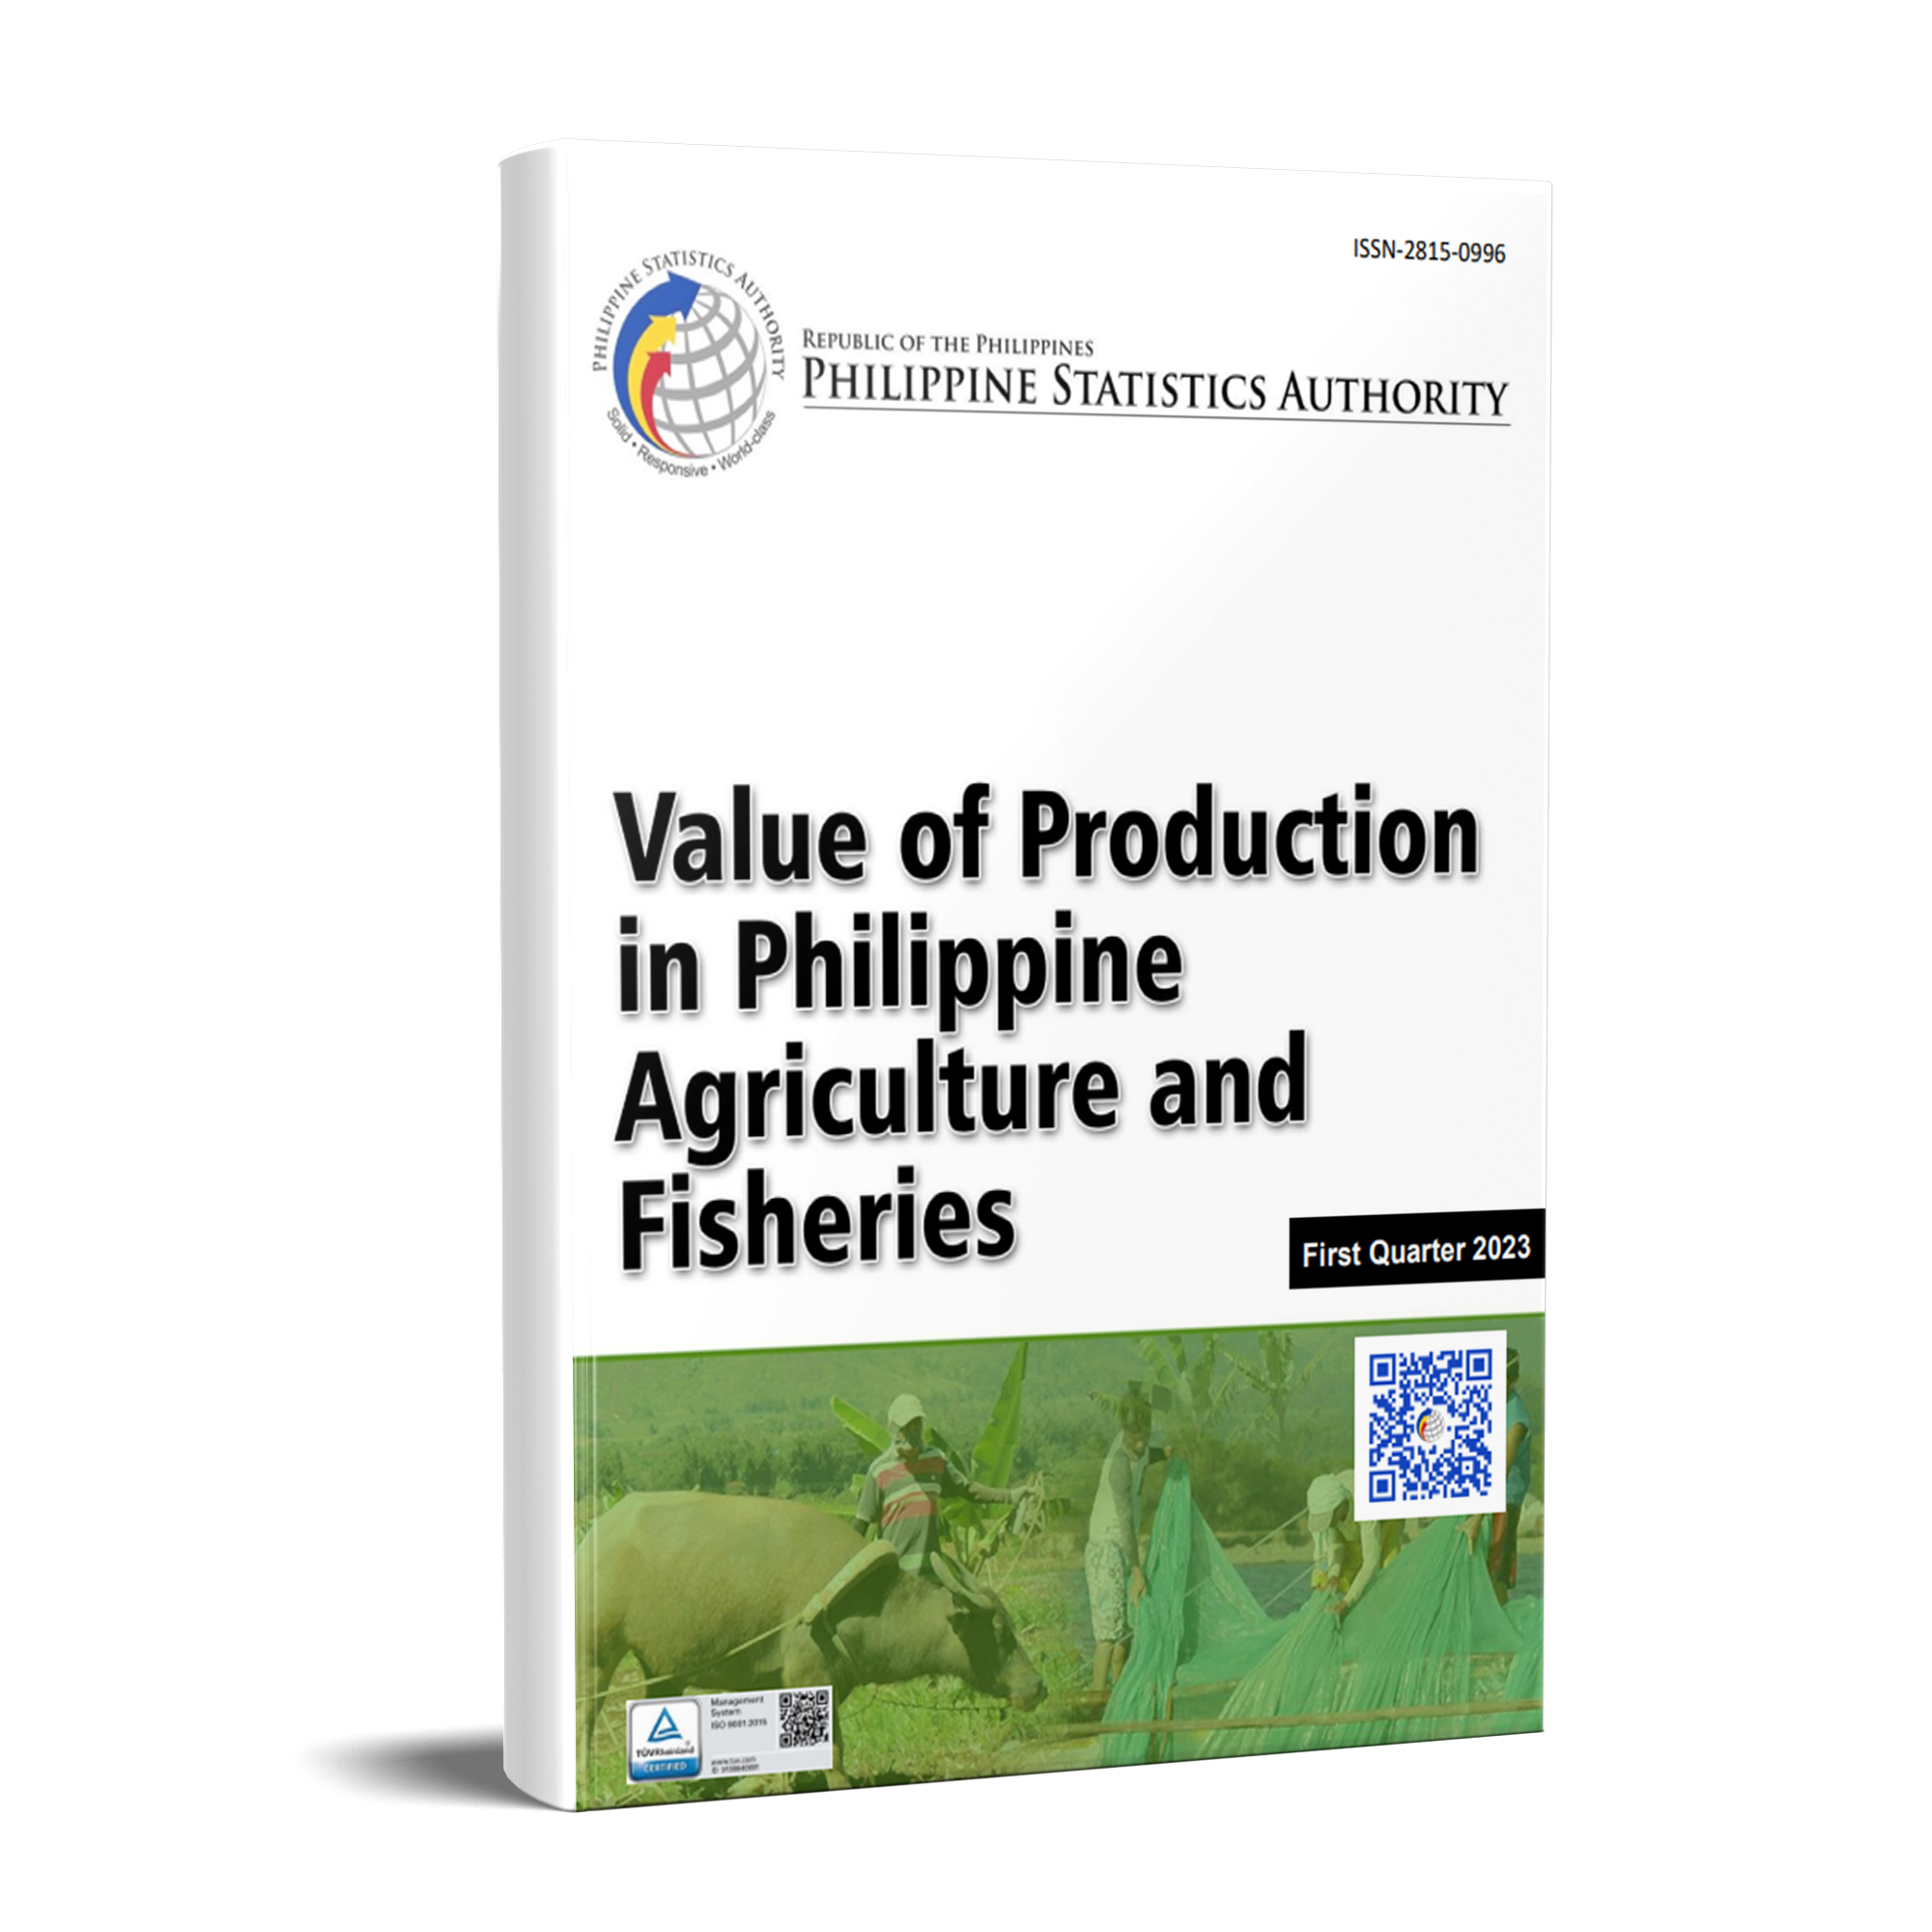 Performance of Philippine Agriculture (Value of Production in Philippine Agriculture and Fisheries)